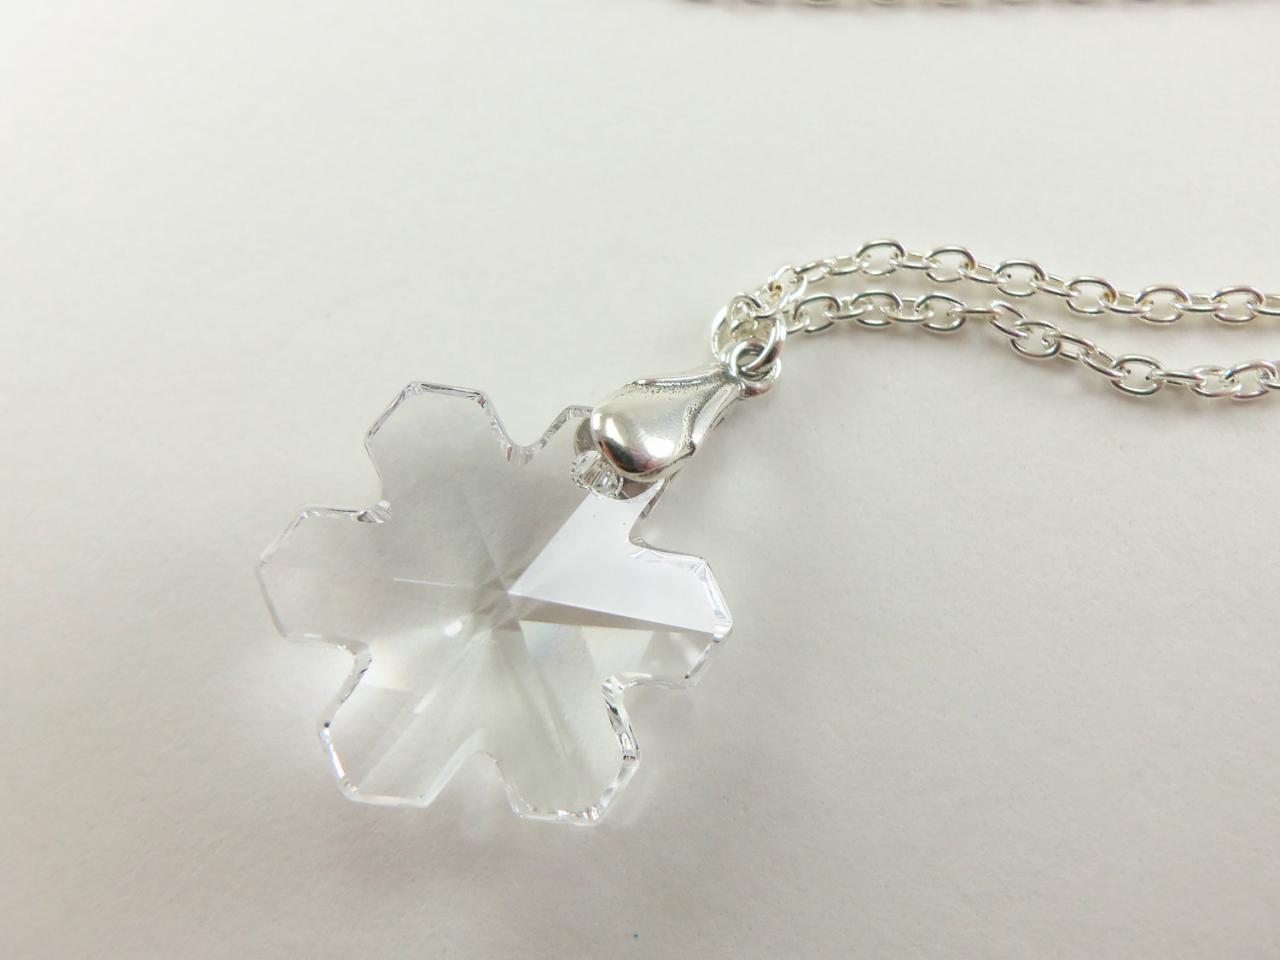 Snowflake Necklace Crystal Jewelry Winter Fashion Trend Nature Inspired Silver Jewelry